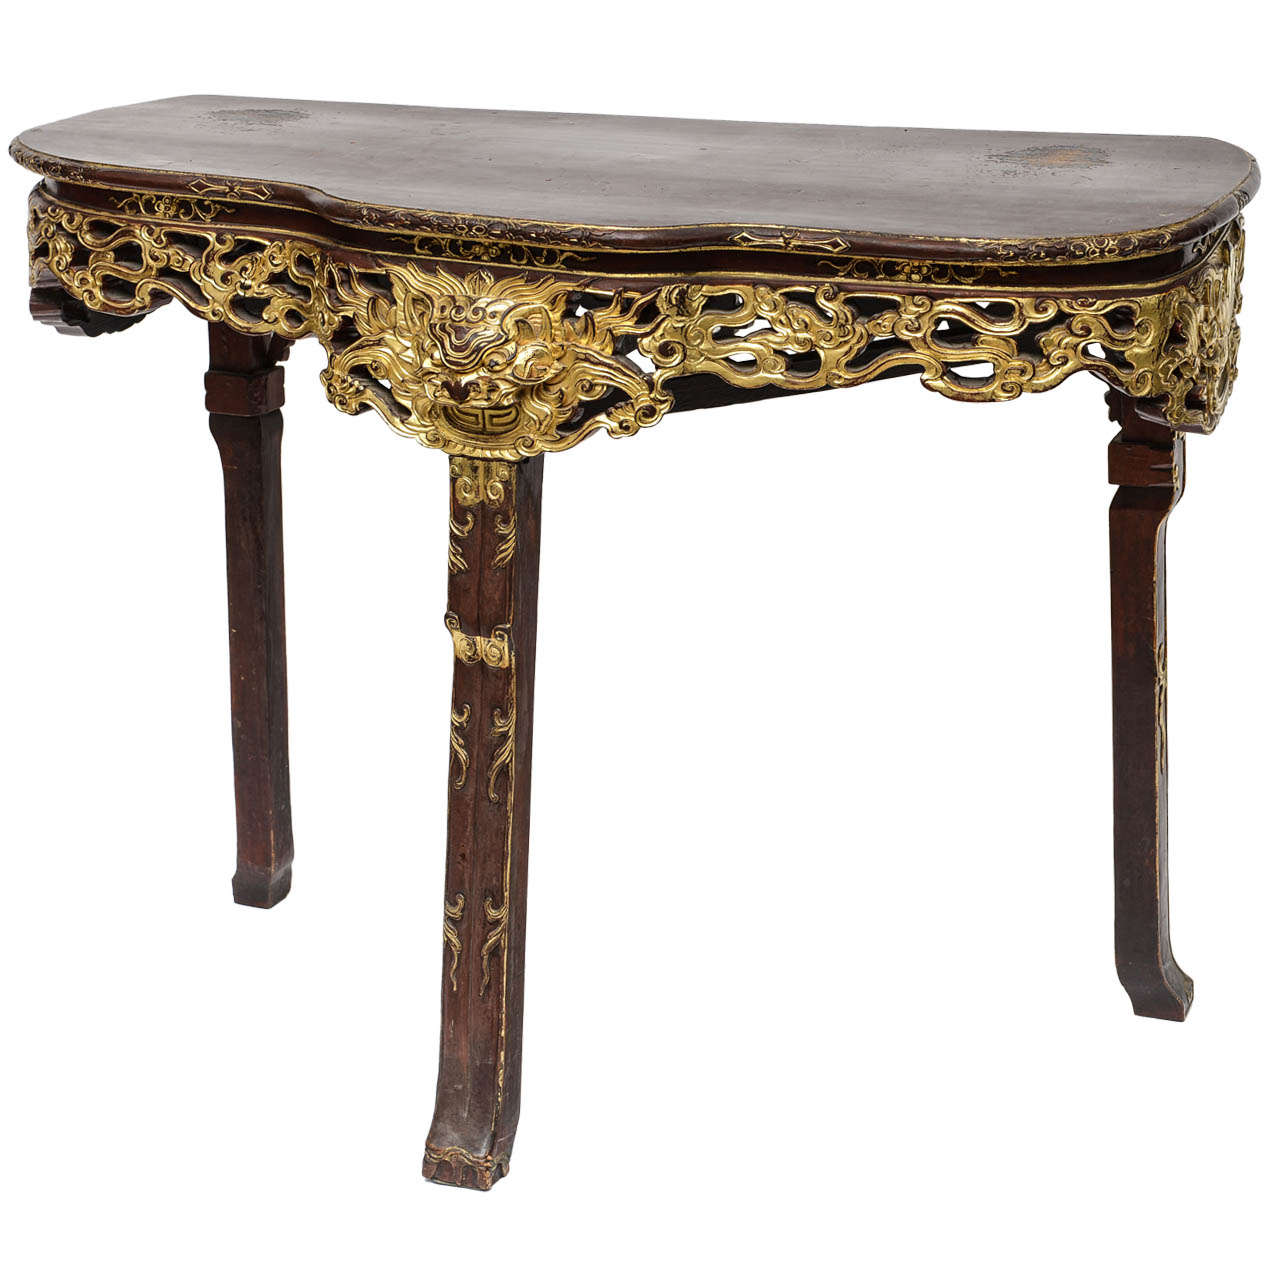 Three-Legged Hand-Carved Chinese Console